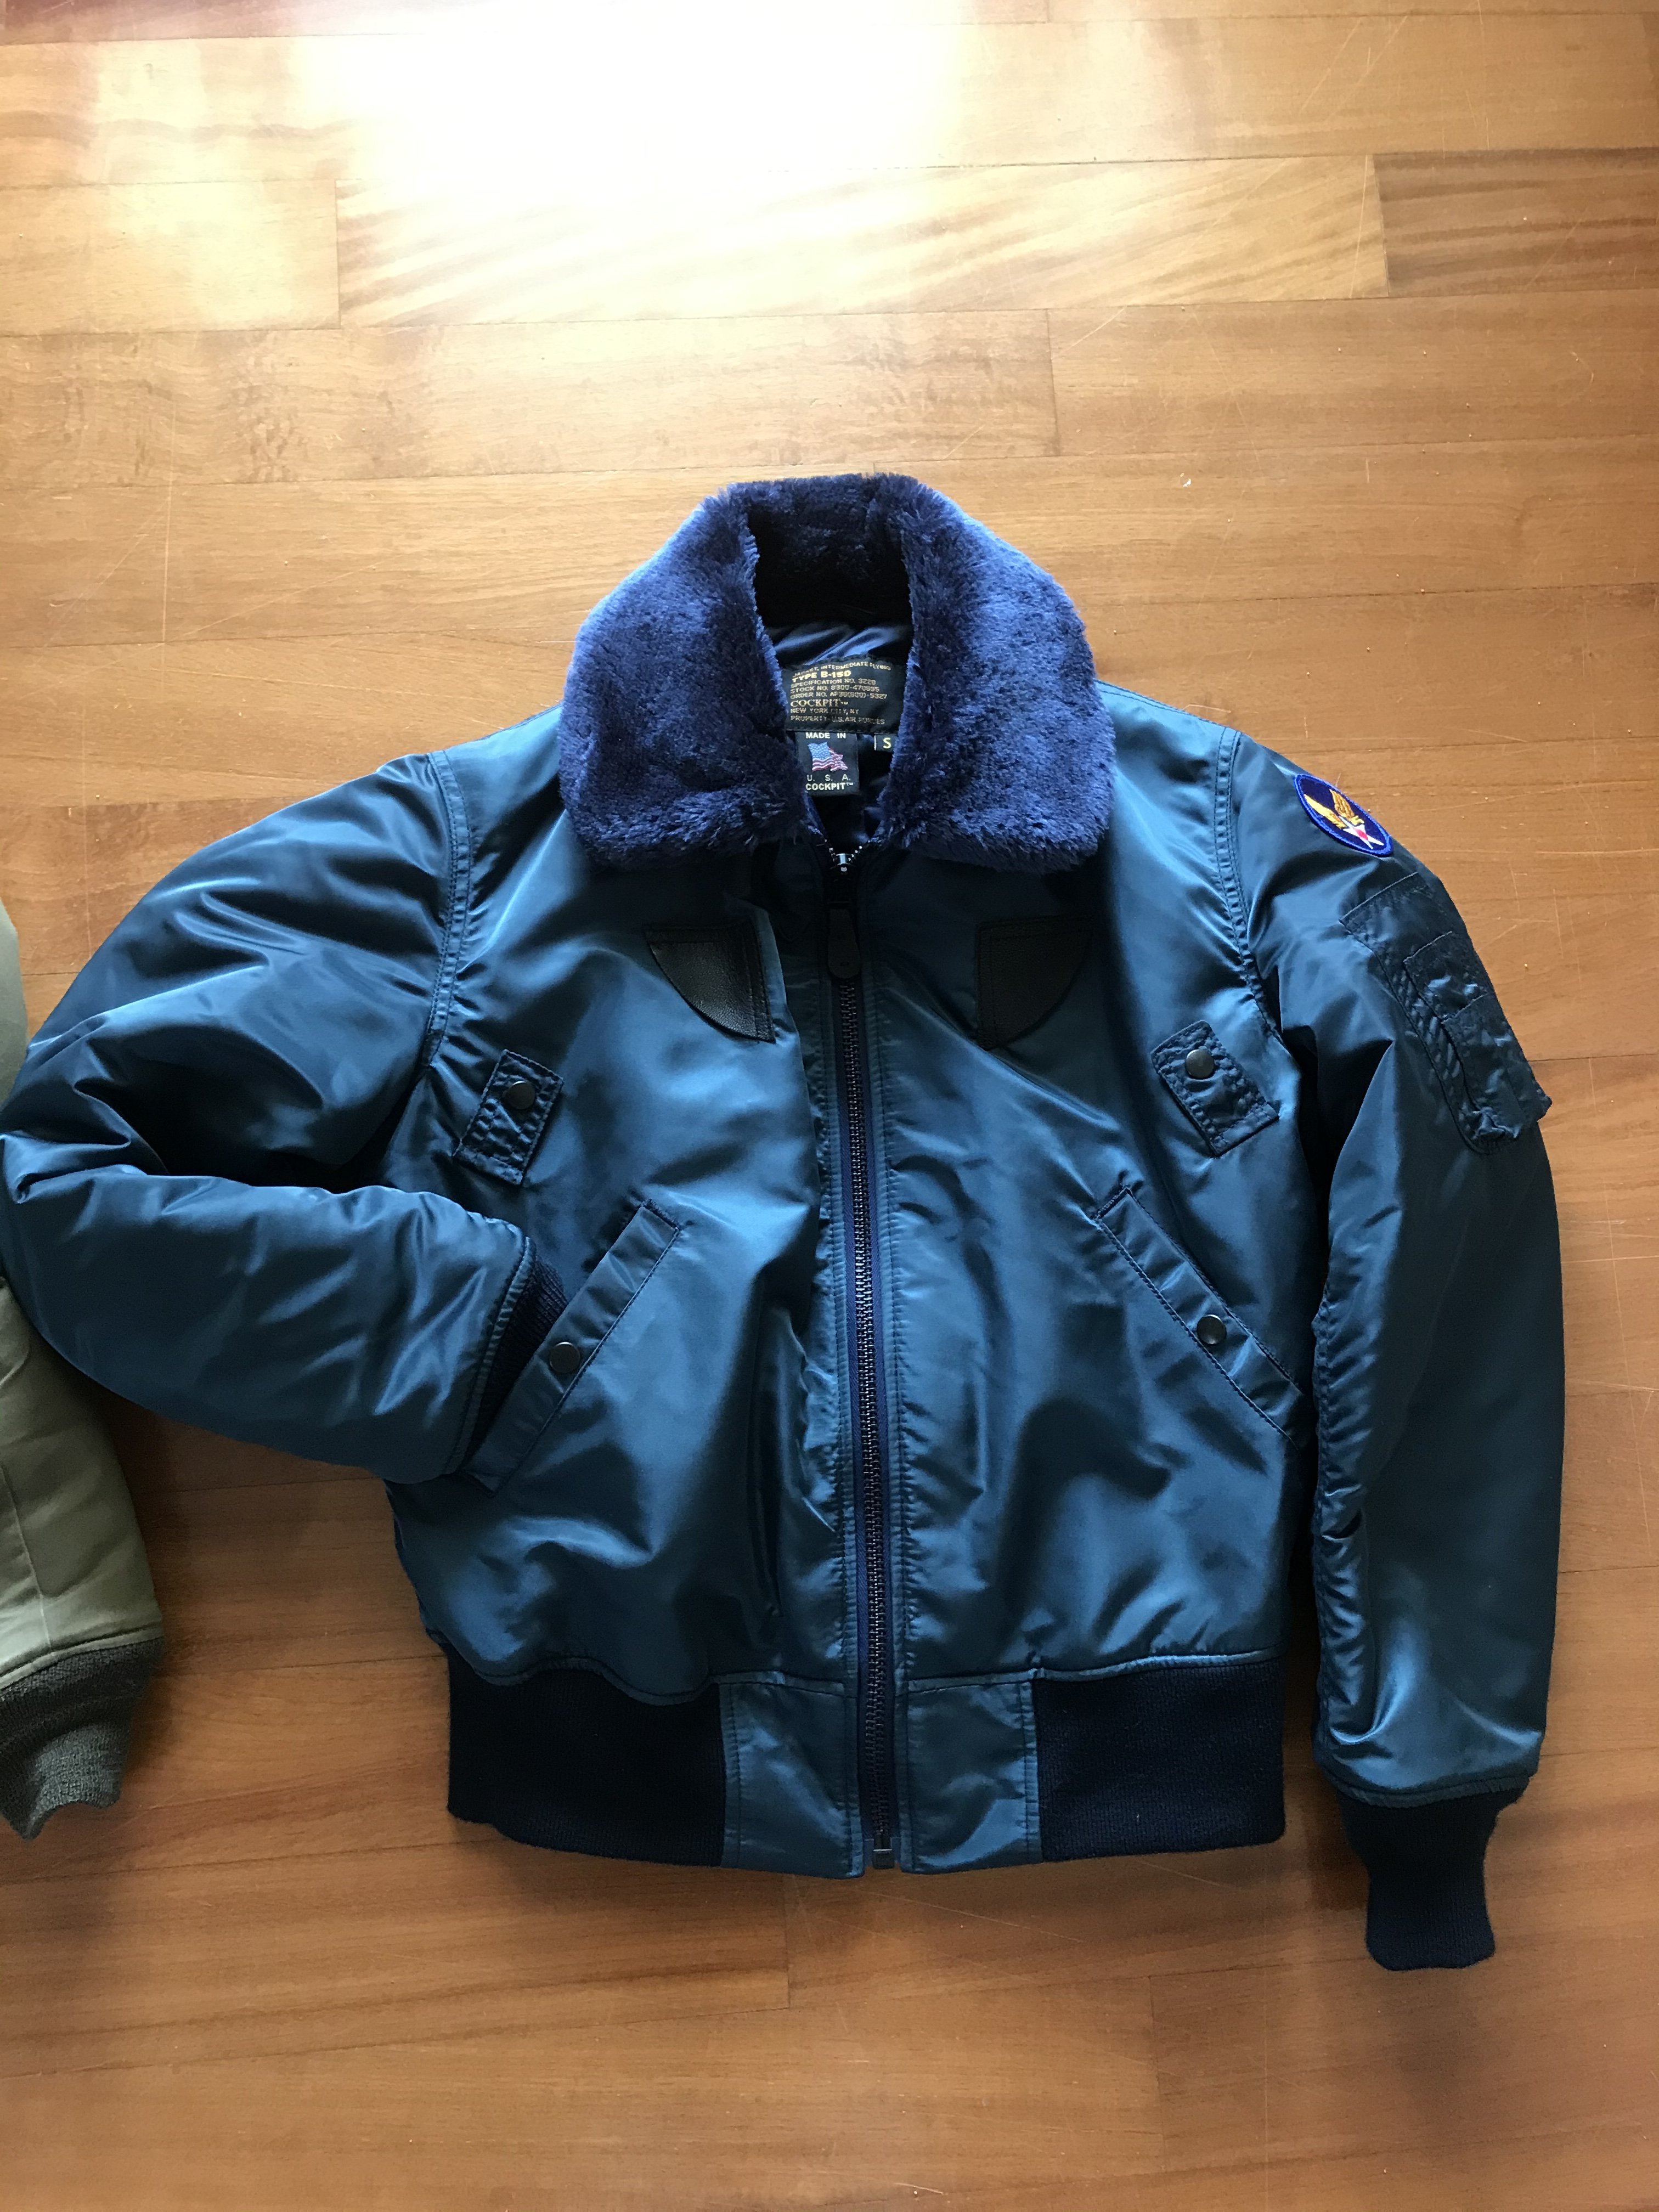 Pit Usa S B15 Jacket Review, Is Usa Leather Jackets Legit